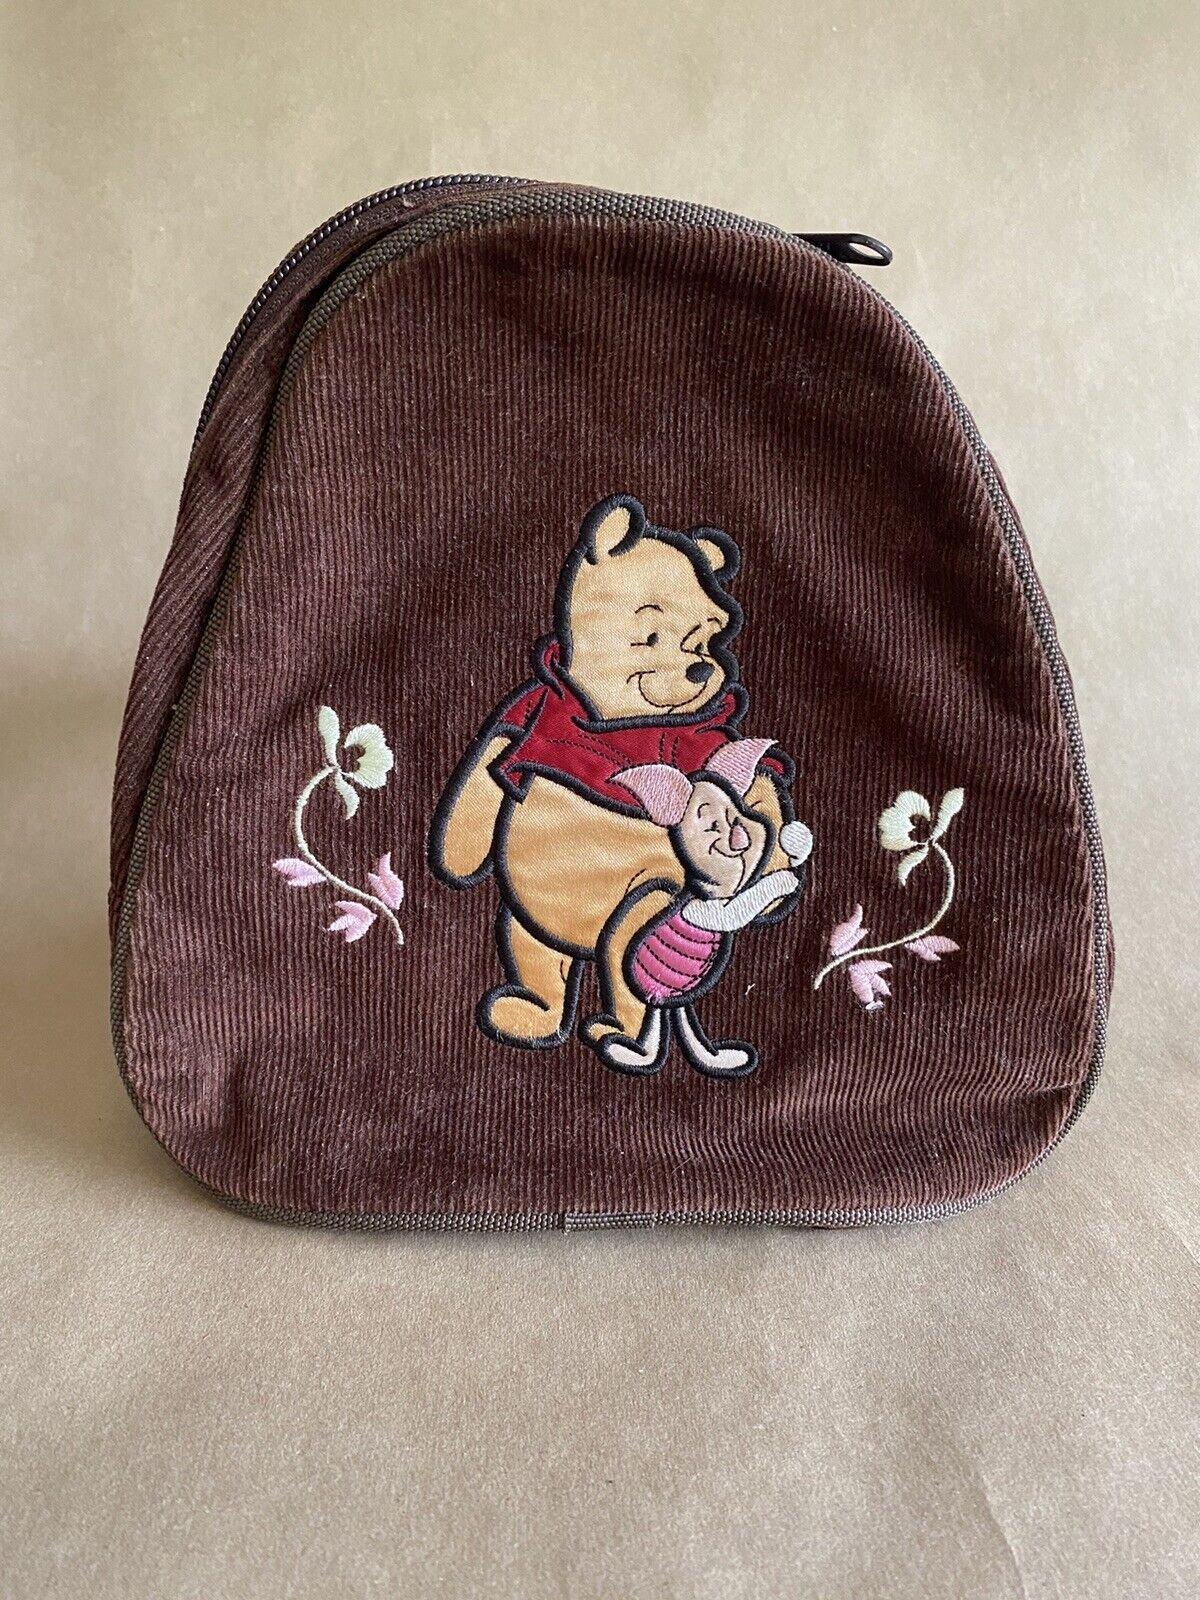 Winnie The Pooh Mini Backpack For Toddler Or Child